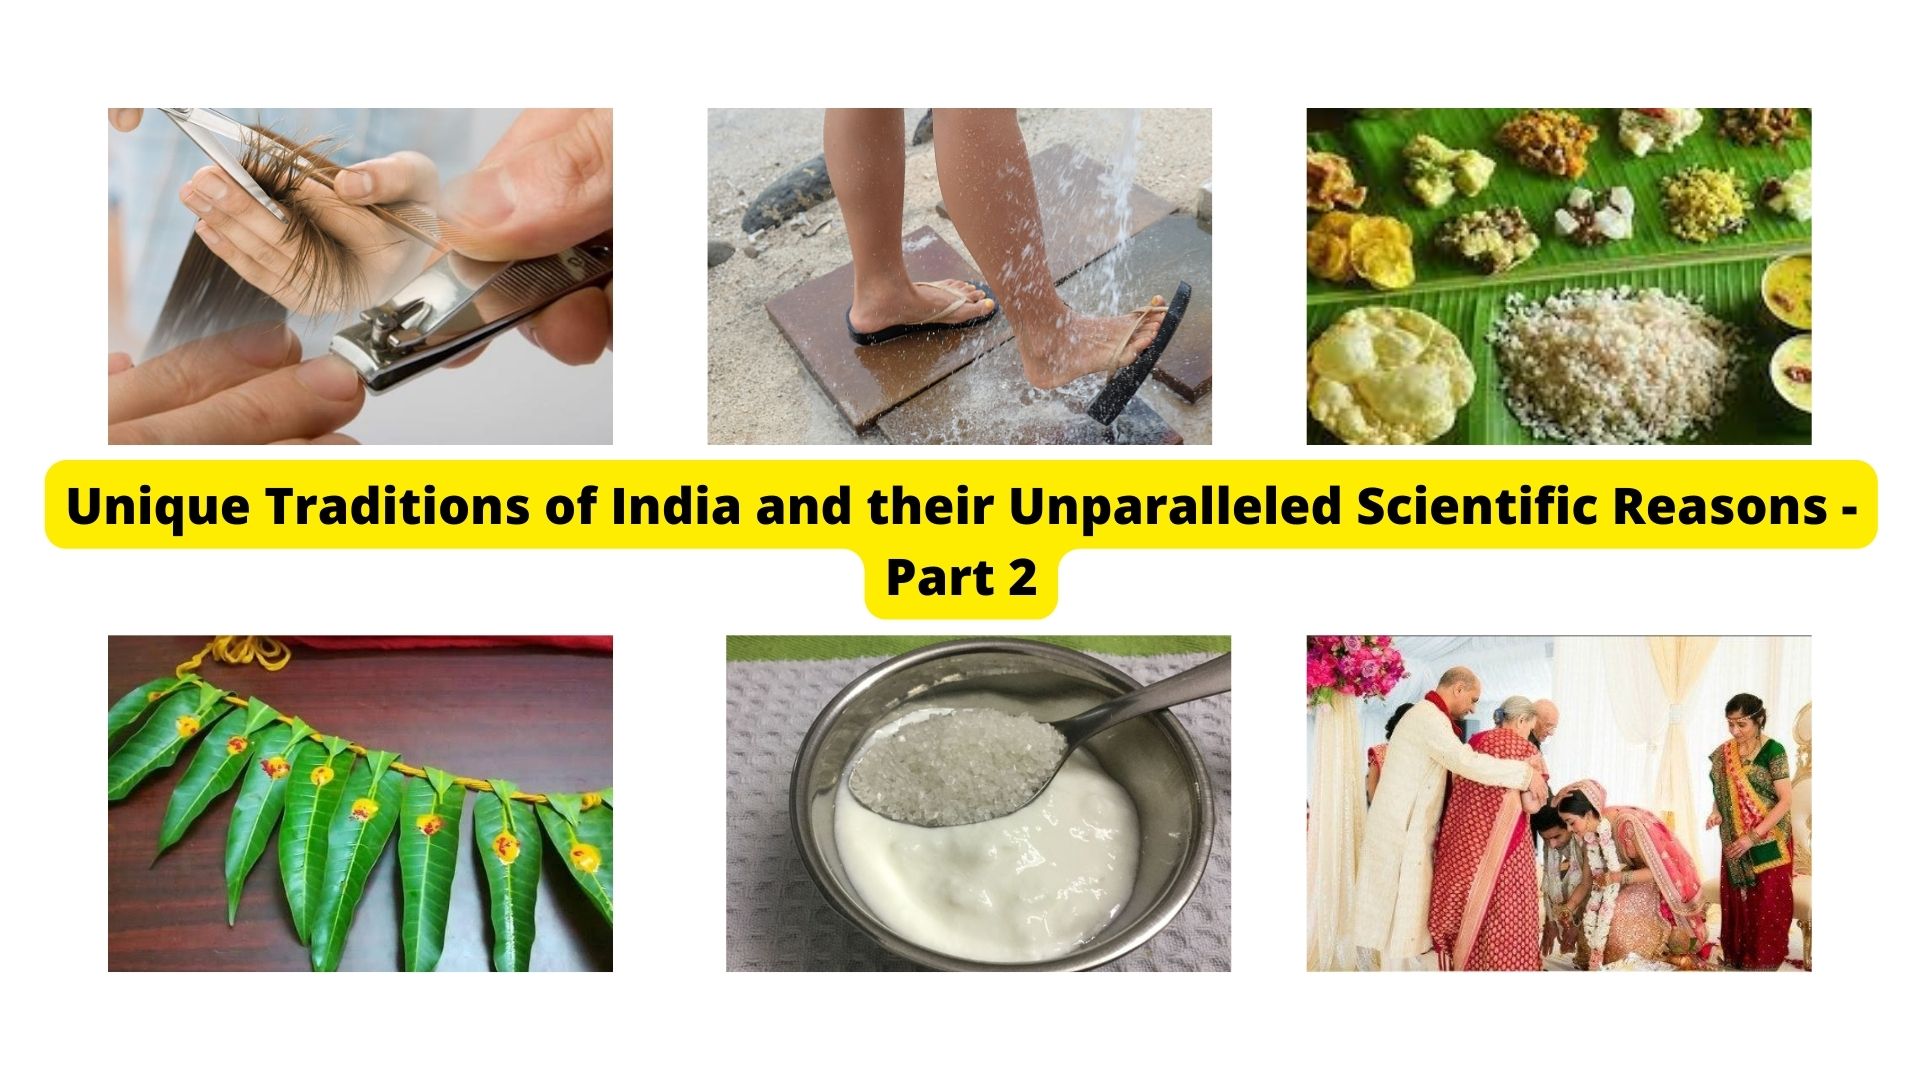 Unique Traditions of India and their Unparalleled Scientific Reasons - Part 2